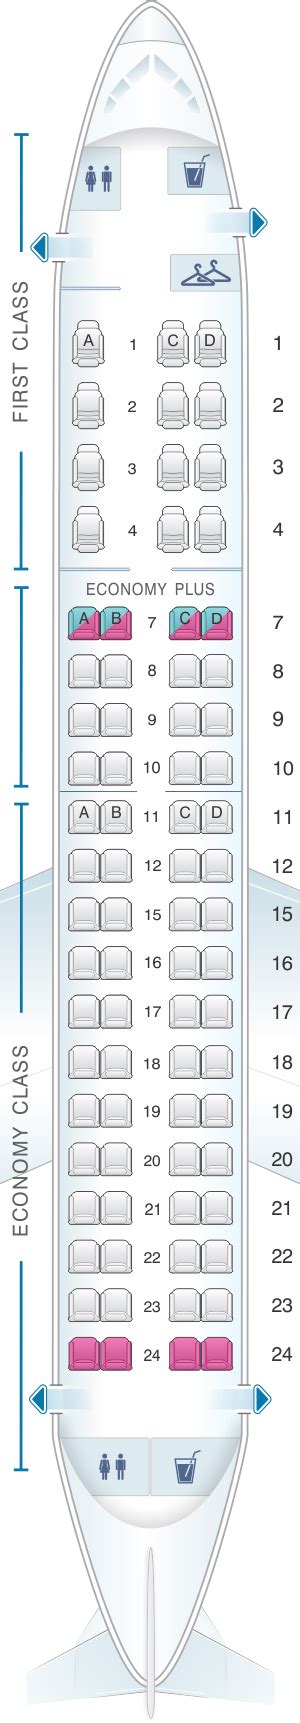 Airbus A319. Airbus A320. Airbus A320 neo. Airbus A321 187pax. Detailed seat map American Airlines Embraer ERJ 175 V1. Find the best airplanes seats, information on legroom, recline and in-flight entertainment using our detailed online seating charts.. 